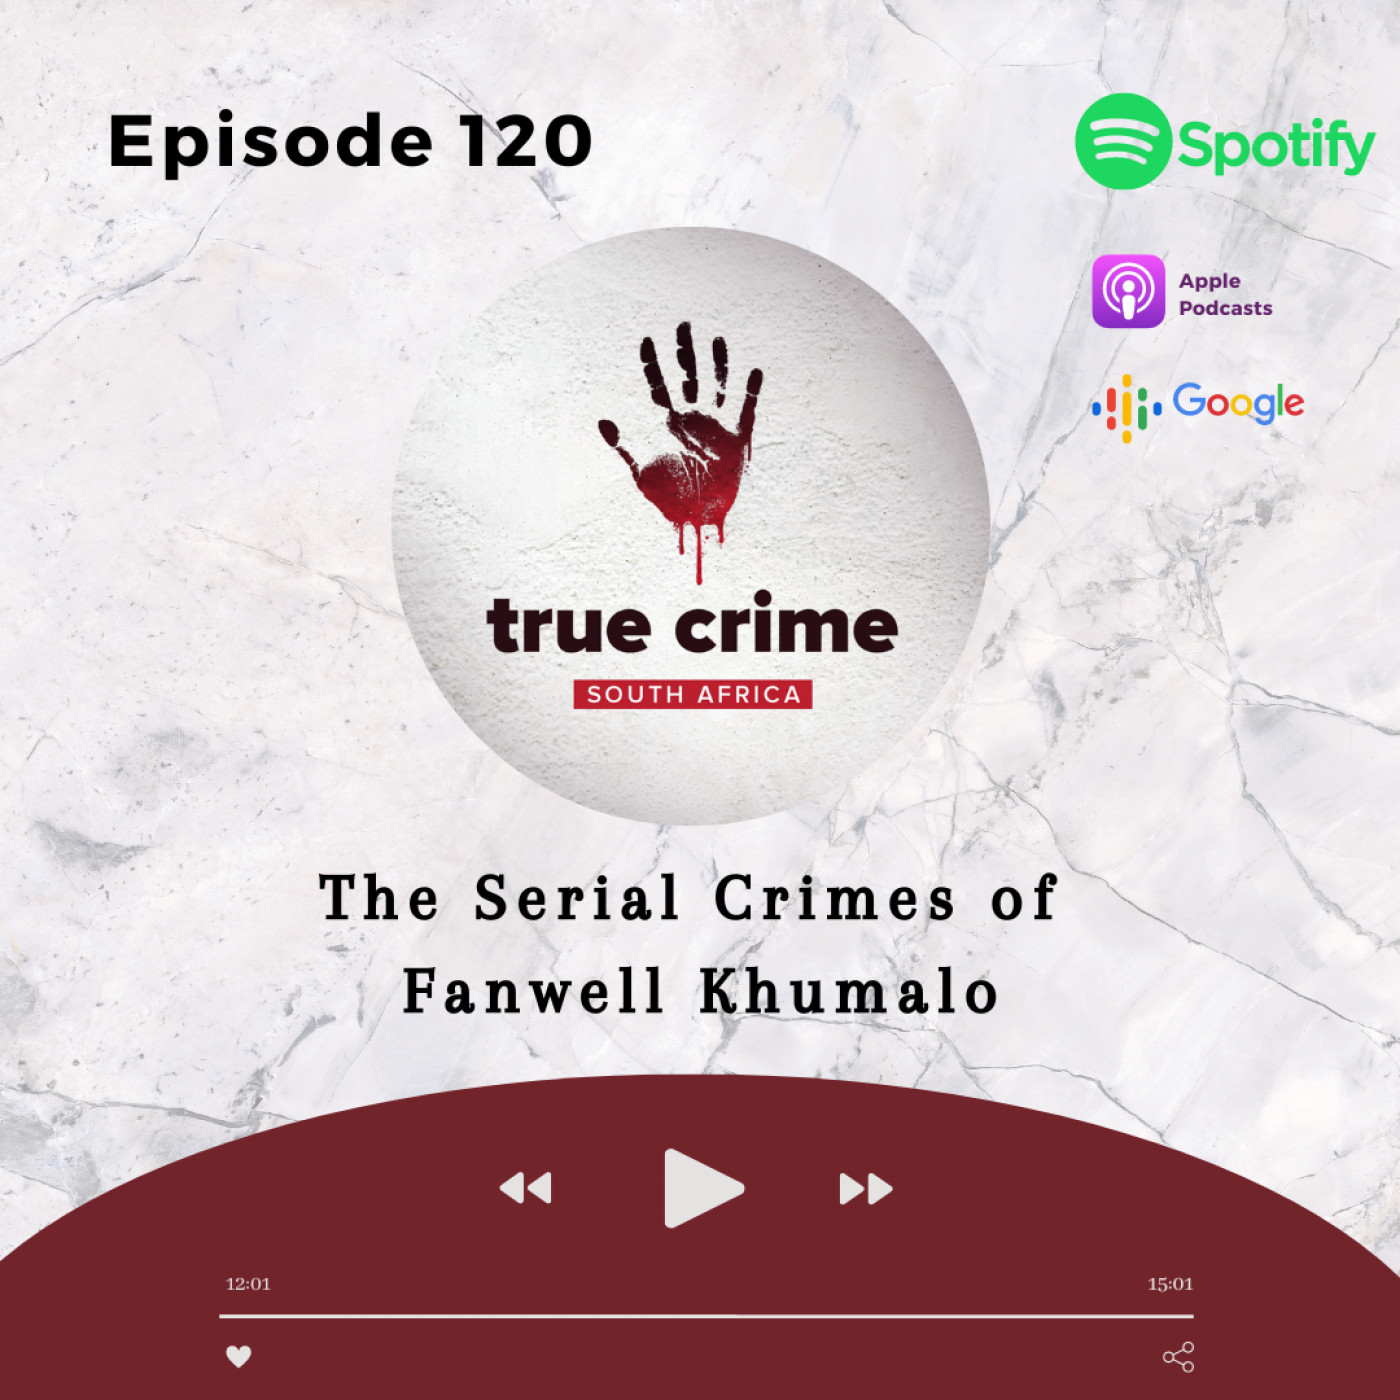 Episode 120 The Serial Crimes of Fanwell Khumalo